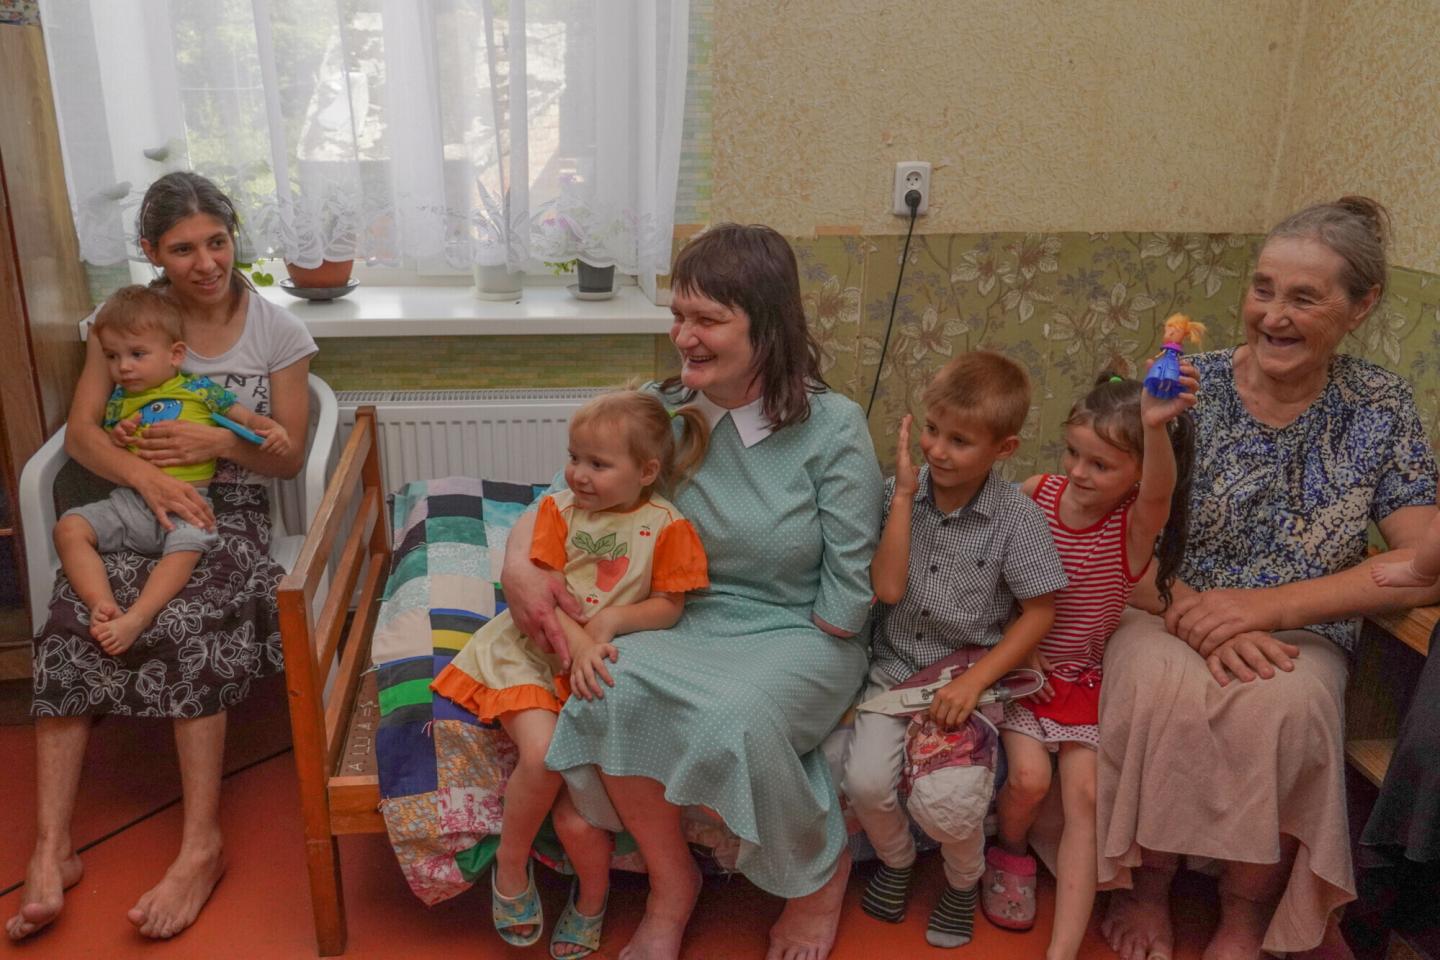 A group of three Ukrainian women and three children sit together.